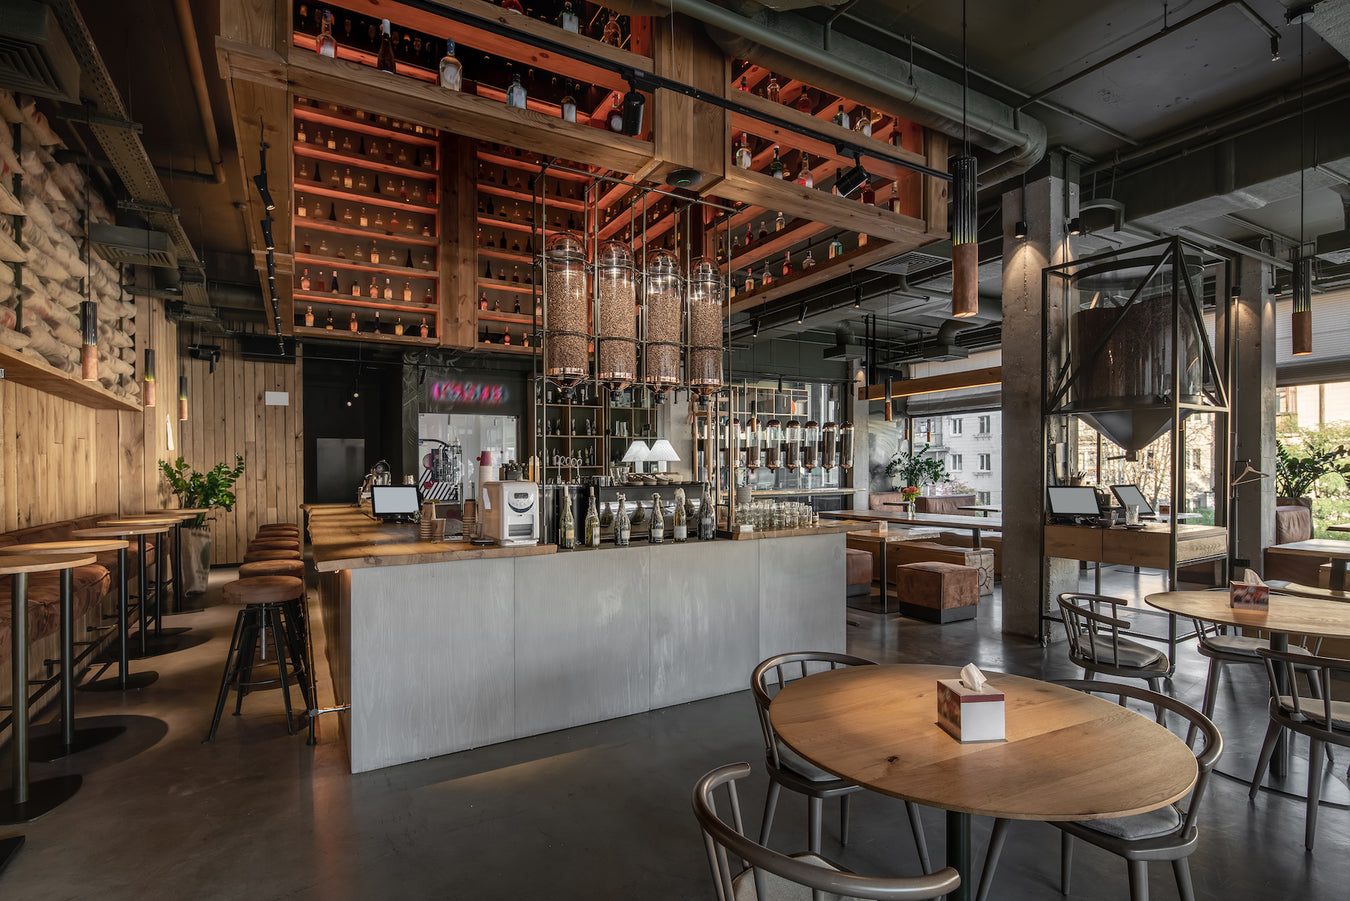 Coffee bar with modern industrial aesthetic